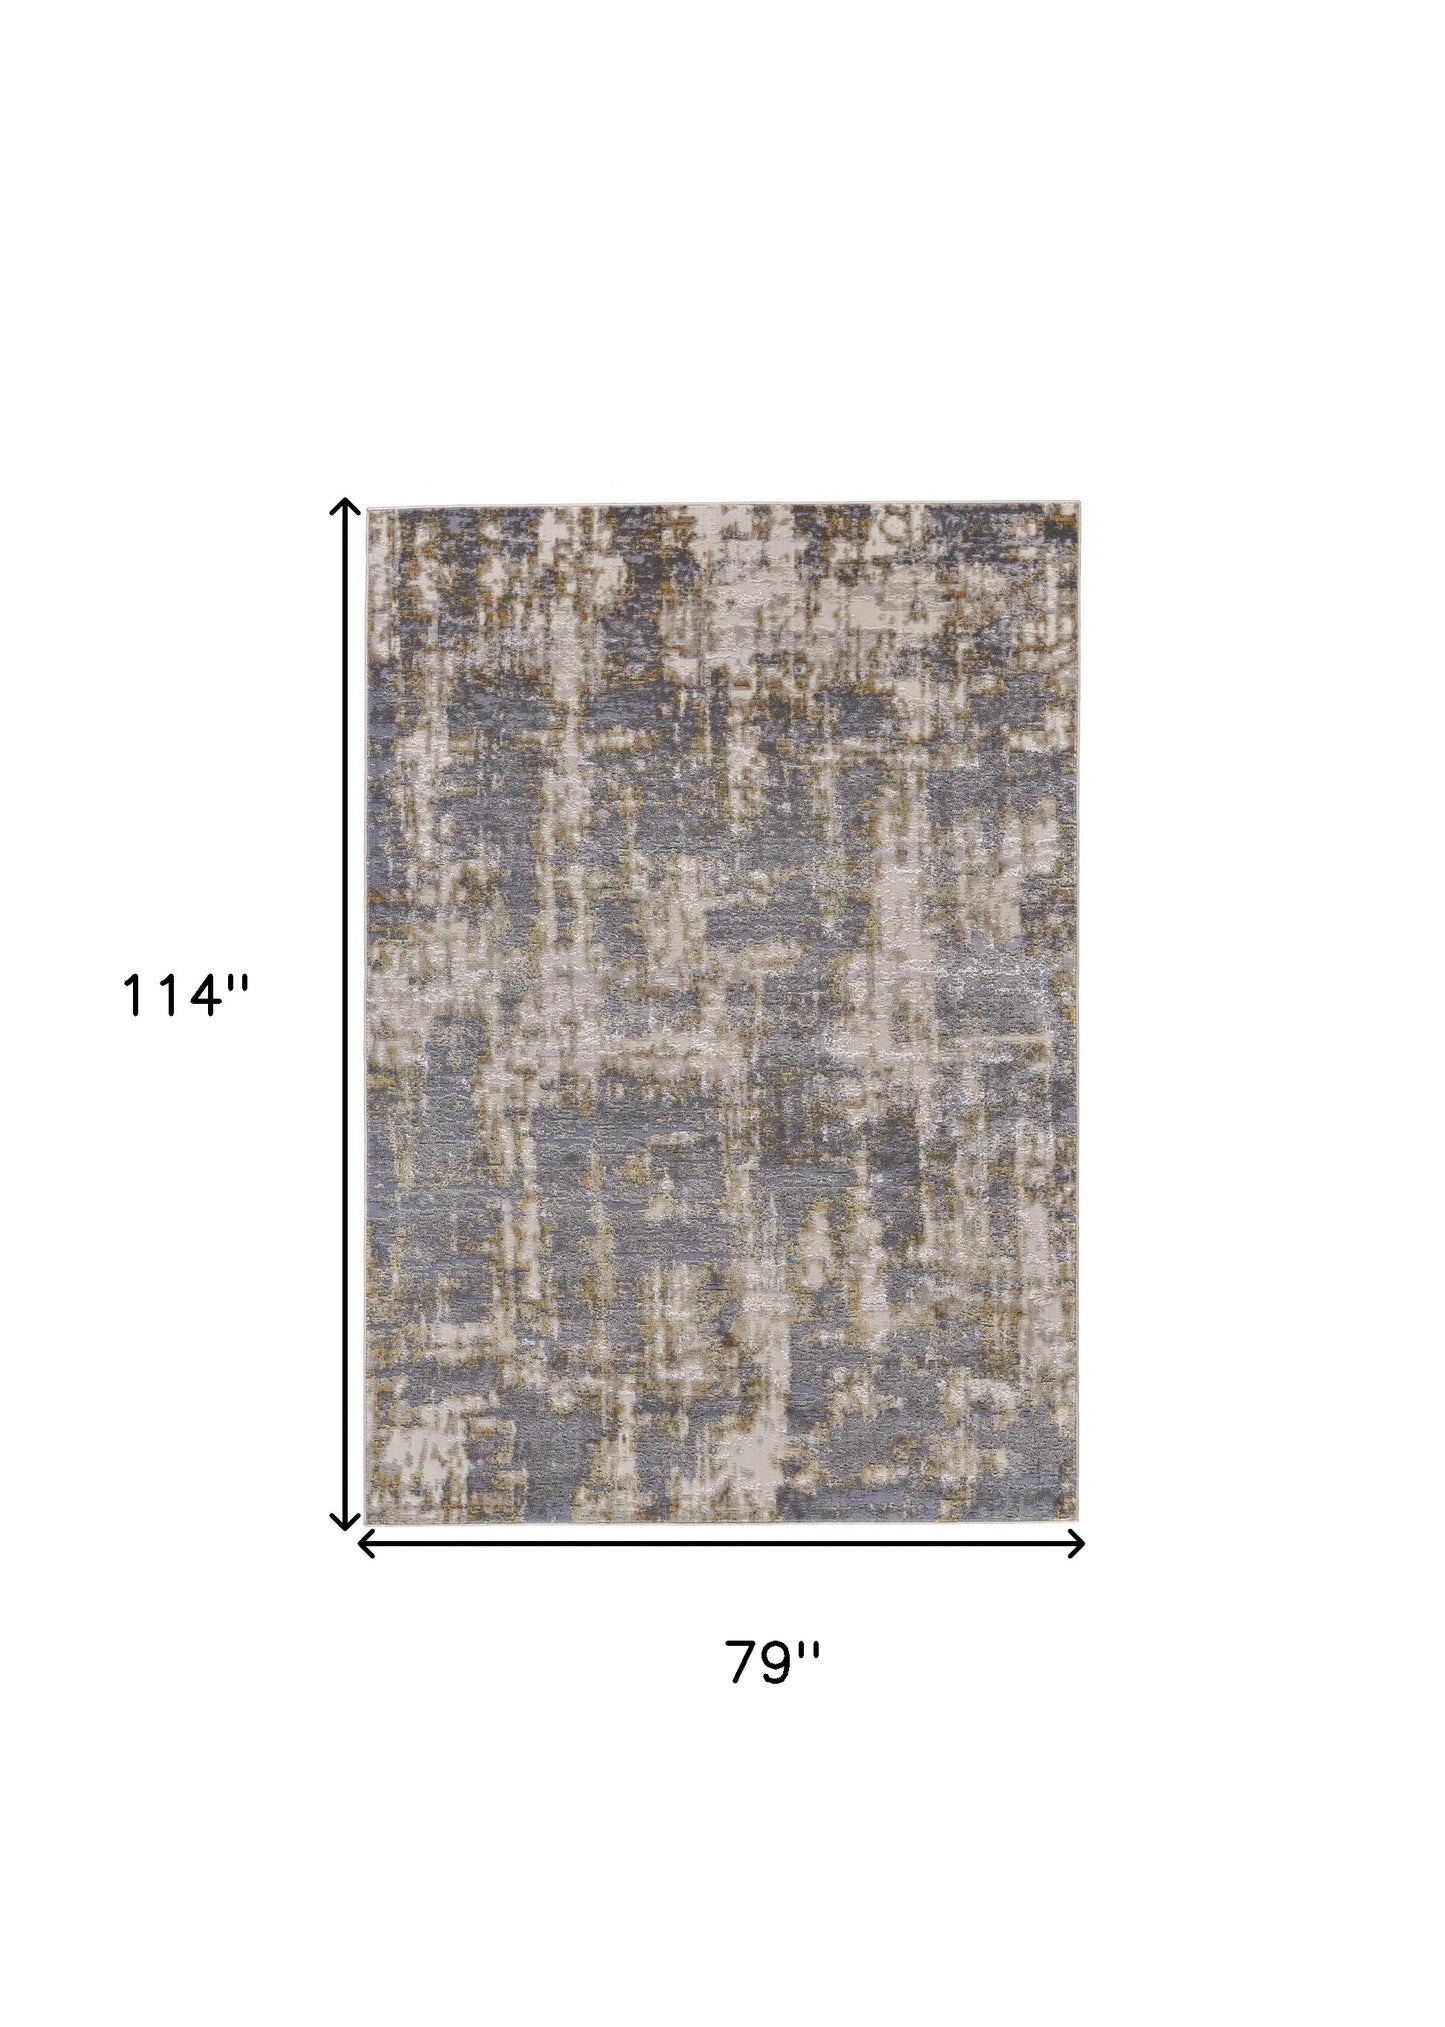 2' X 3' Gray And Gold Abstract Stain Resistant Area Rug